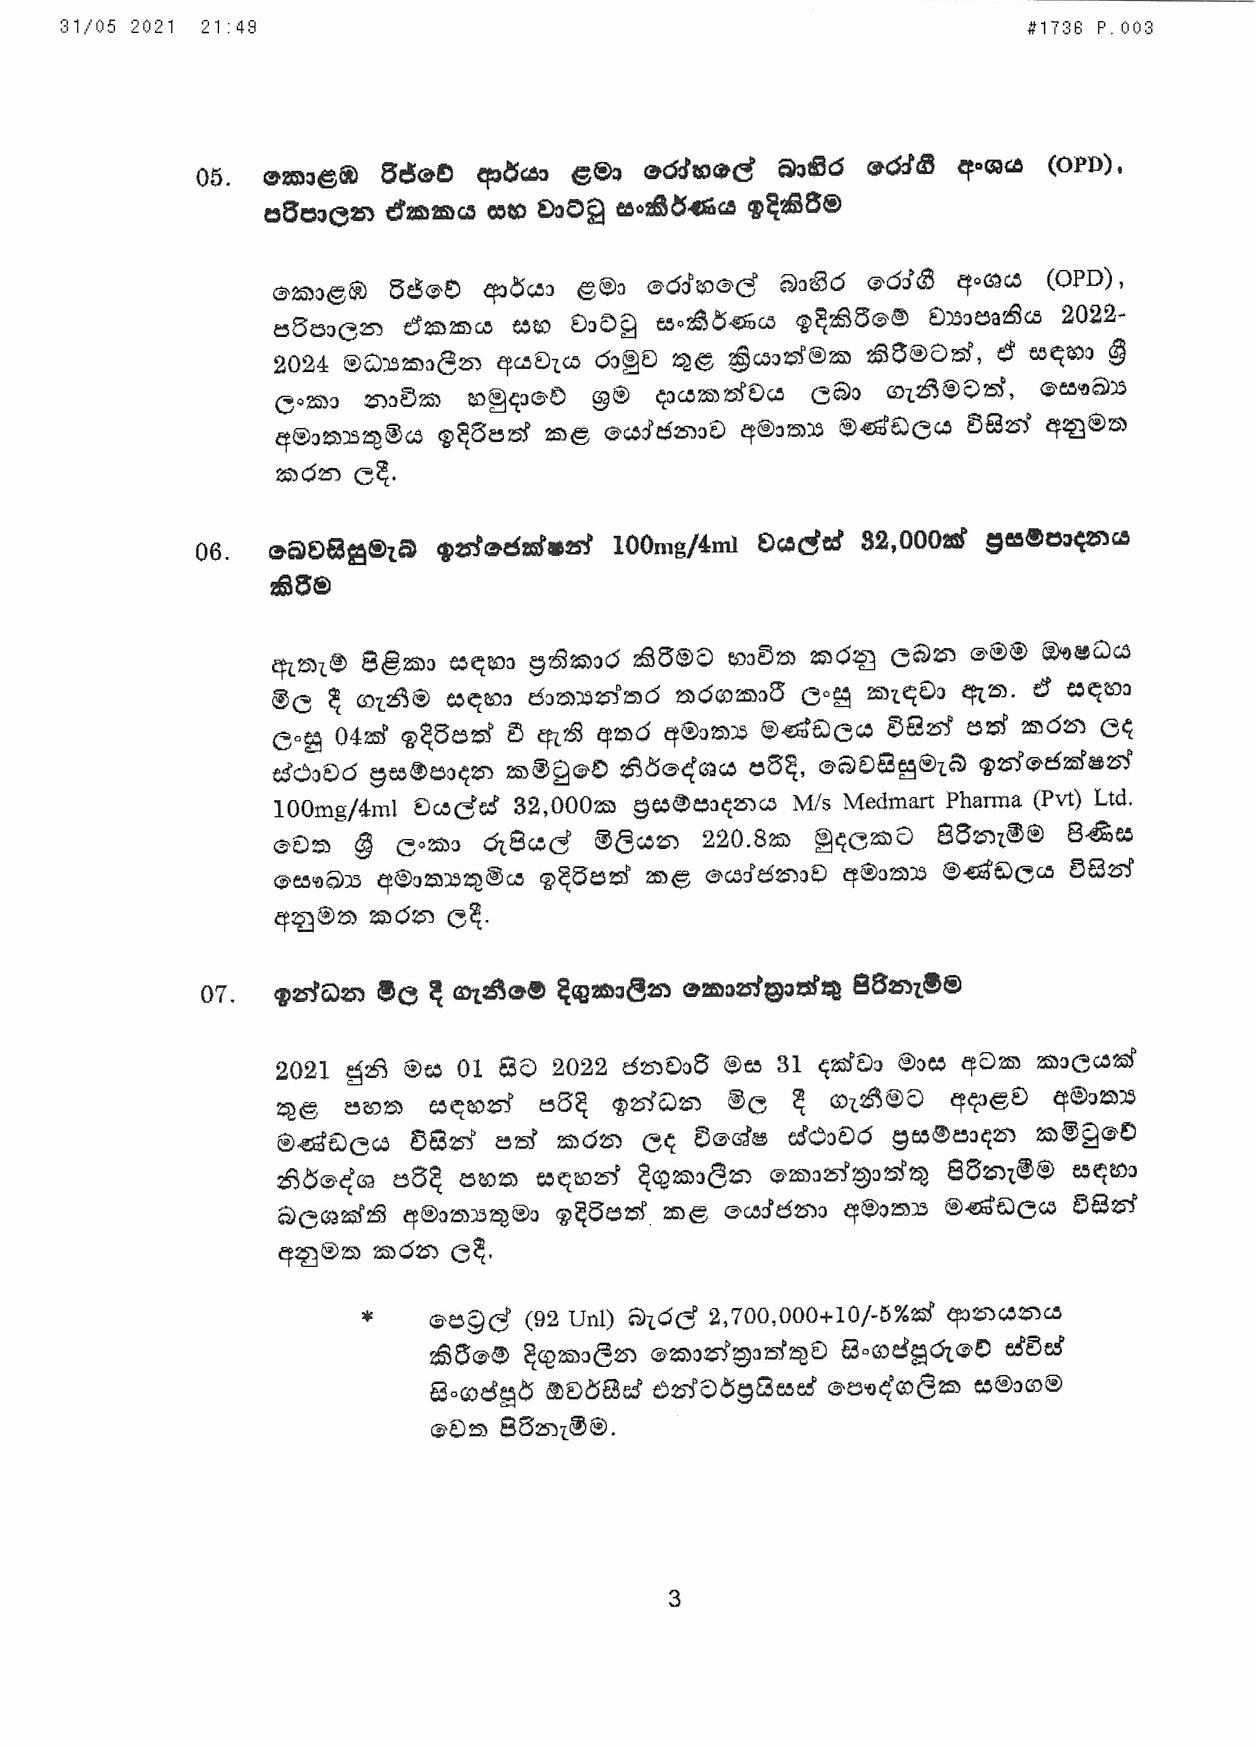 Cabinet Decision on 31.05.2021 page 001